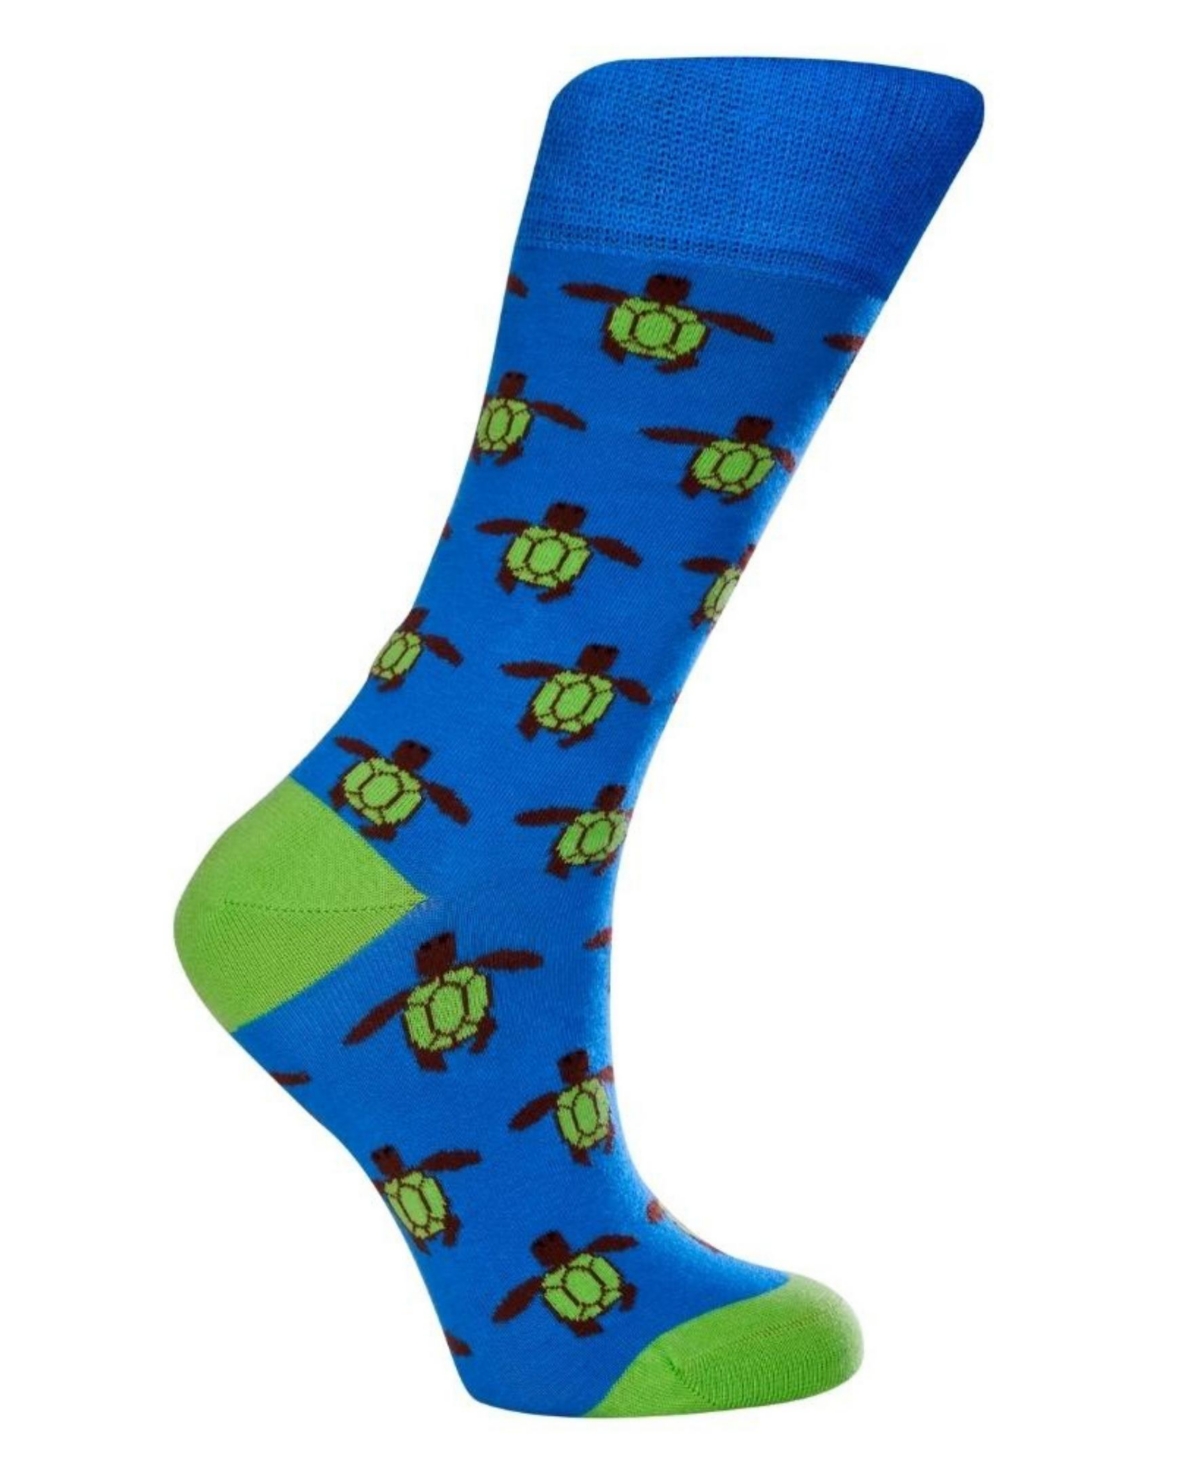 Love Sock Company Women's Turtle W-Cotton Novelty Crew Socks with Seamless Toe Design, Pack of 1